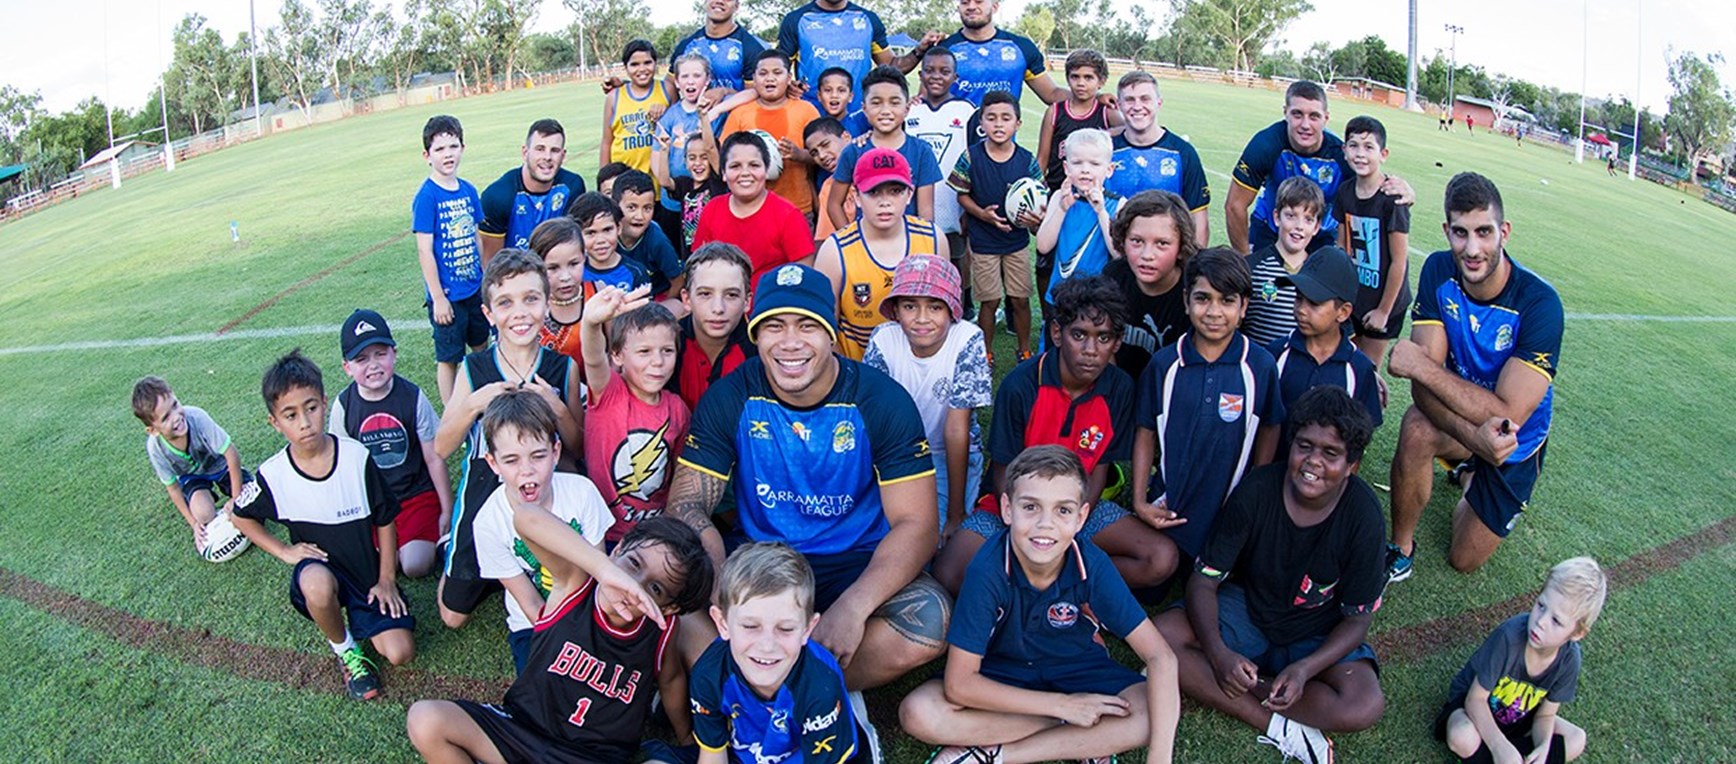 Eels hold 'Come and Try' skills clinic